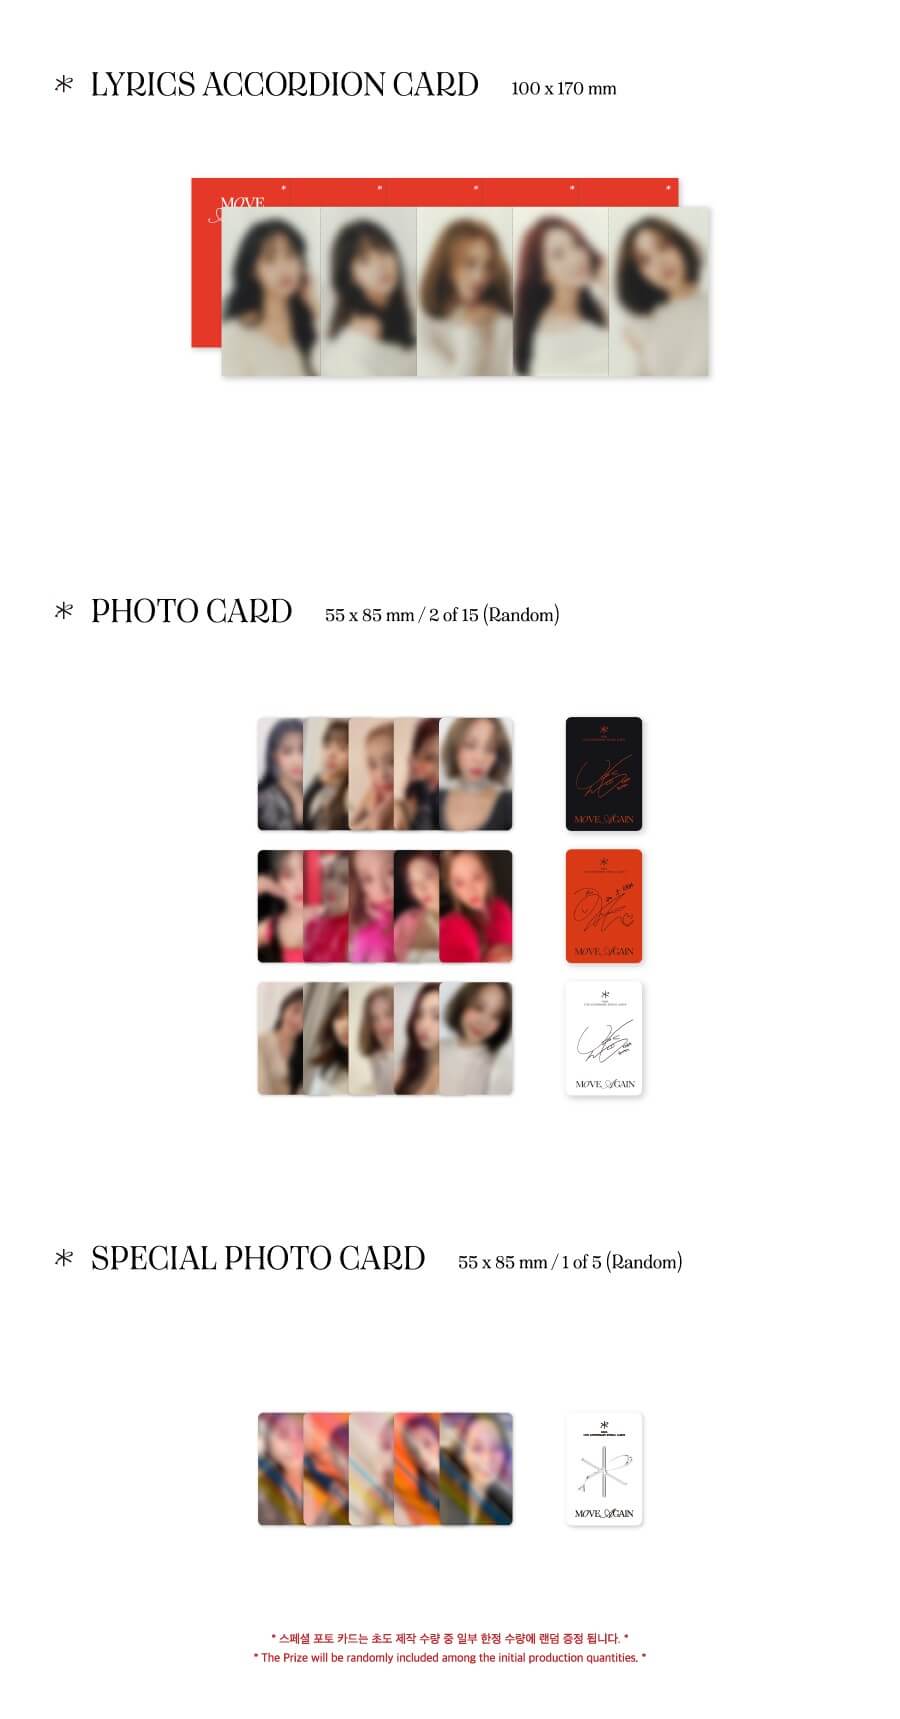 KARA 15th Anniversary Special Album MOVE AGAIN Inclusions Lyrics Accordion Card Photocards 1st Press Only Special Photocard